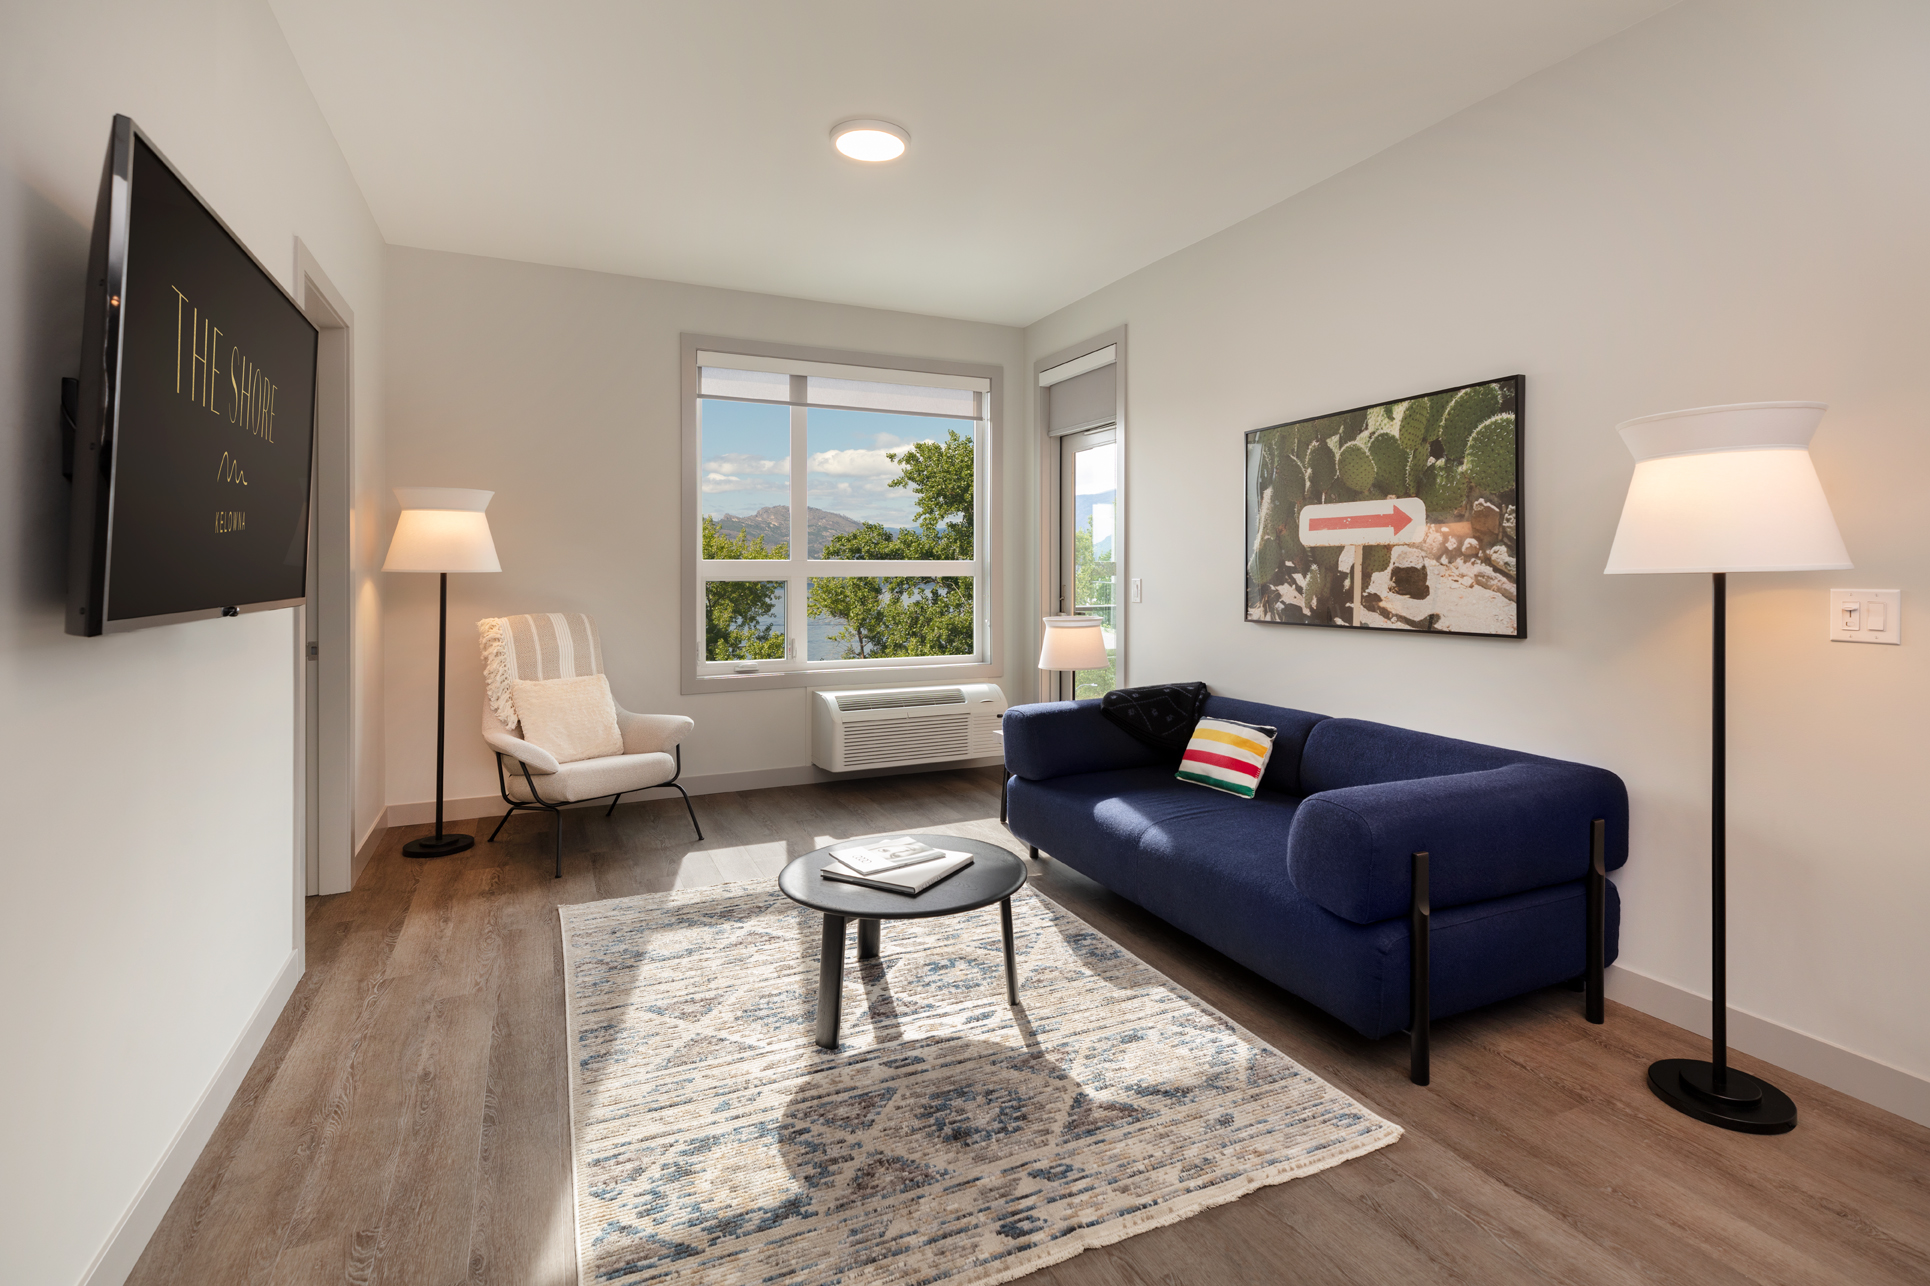 the living room in the 2 bedroom den suite at The Shore Kelowna, with a flatscreen TV, blue couch and decor items